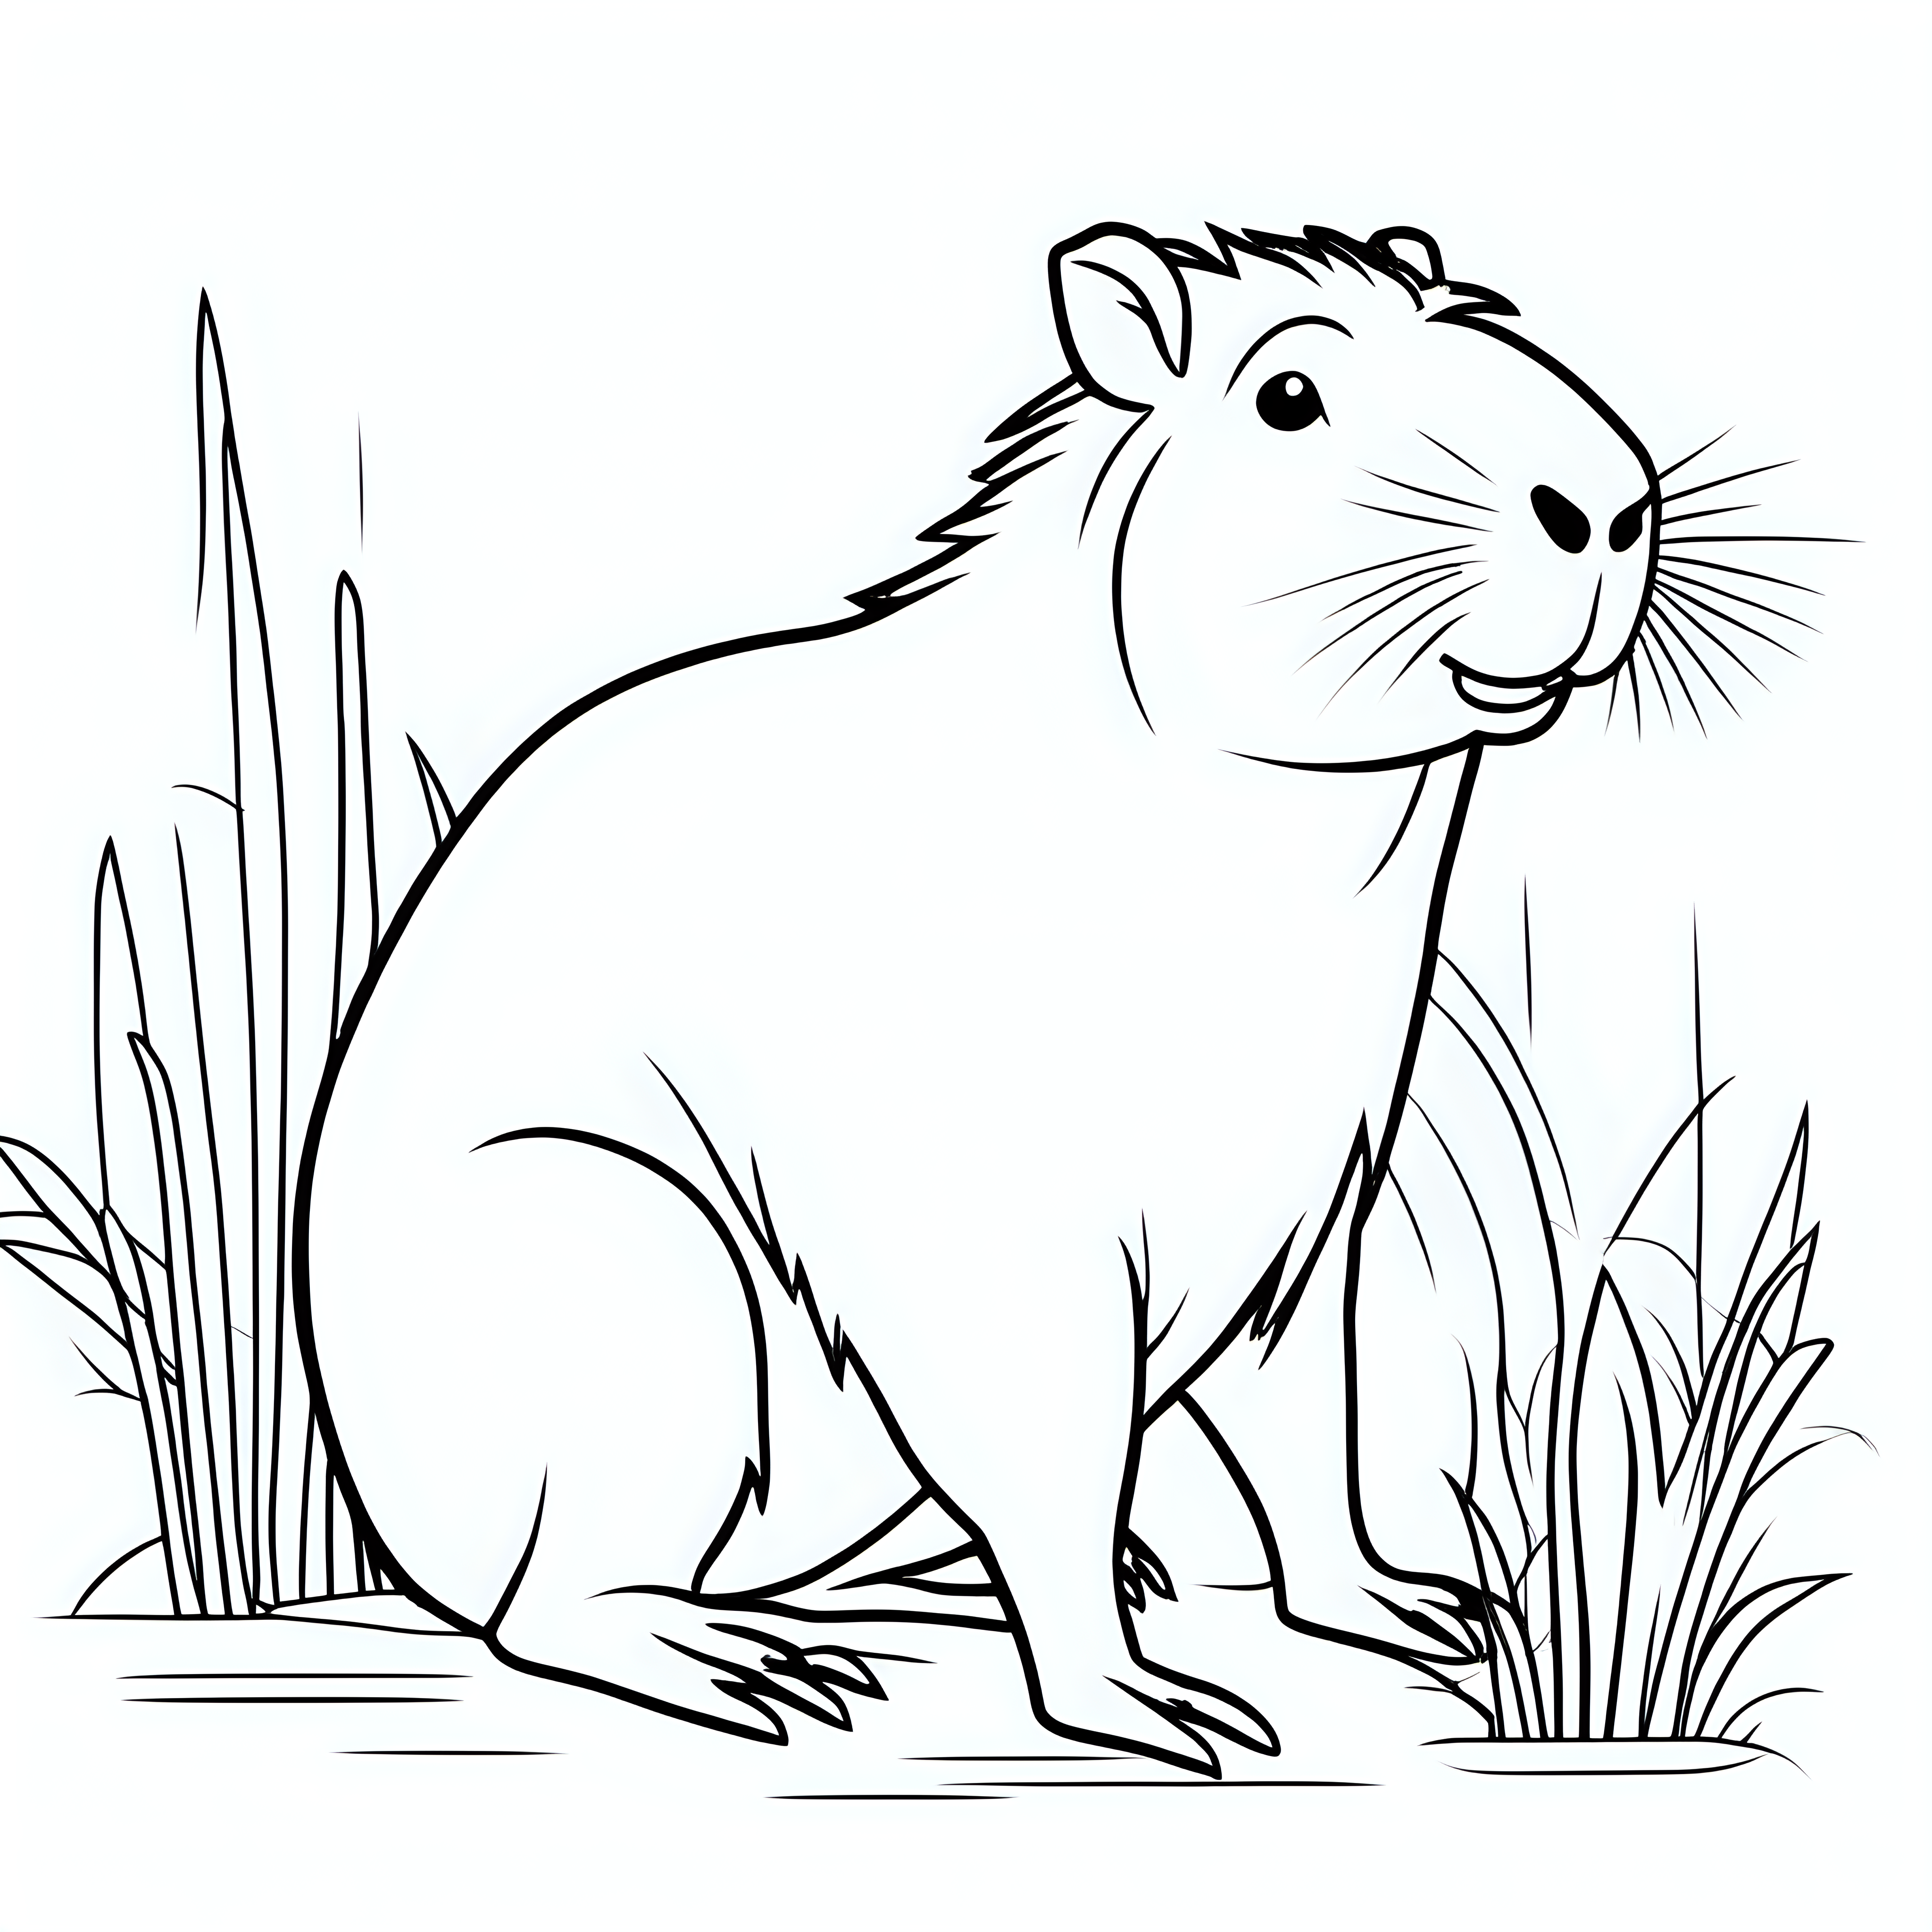 draw a cute capybara with only the outline